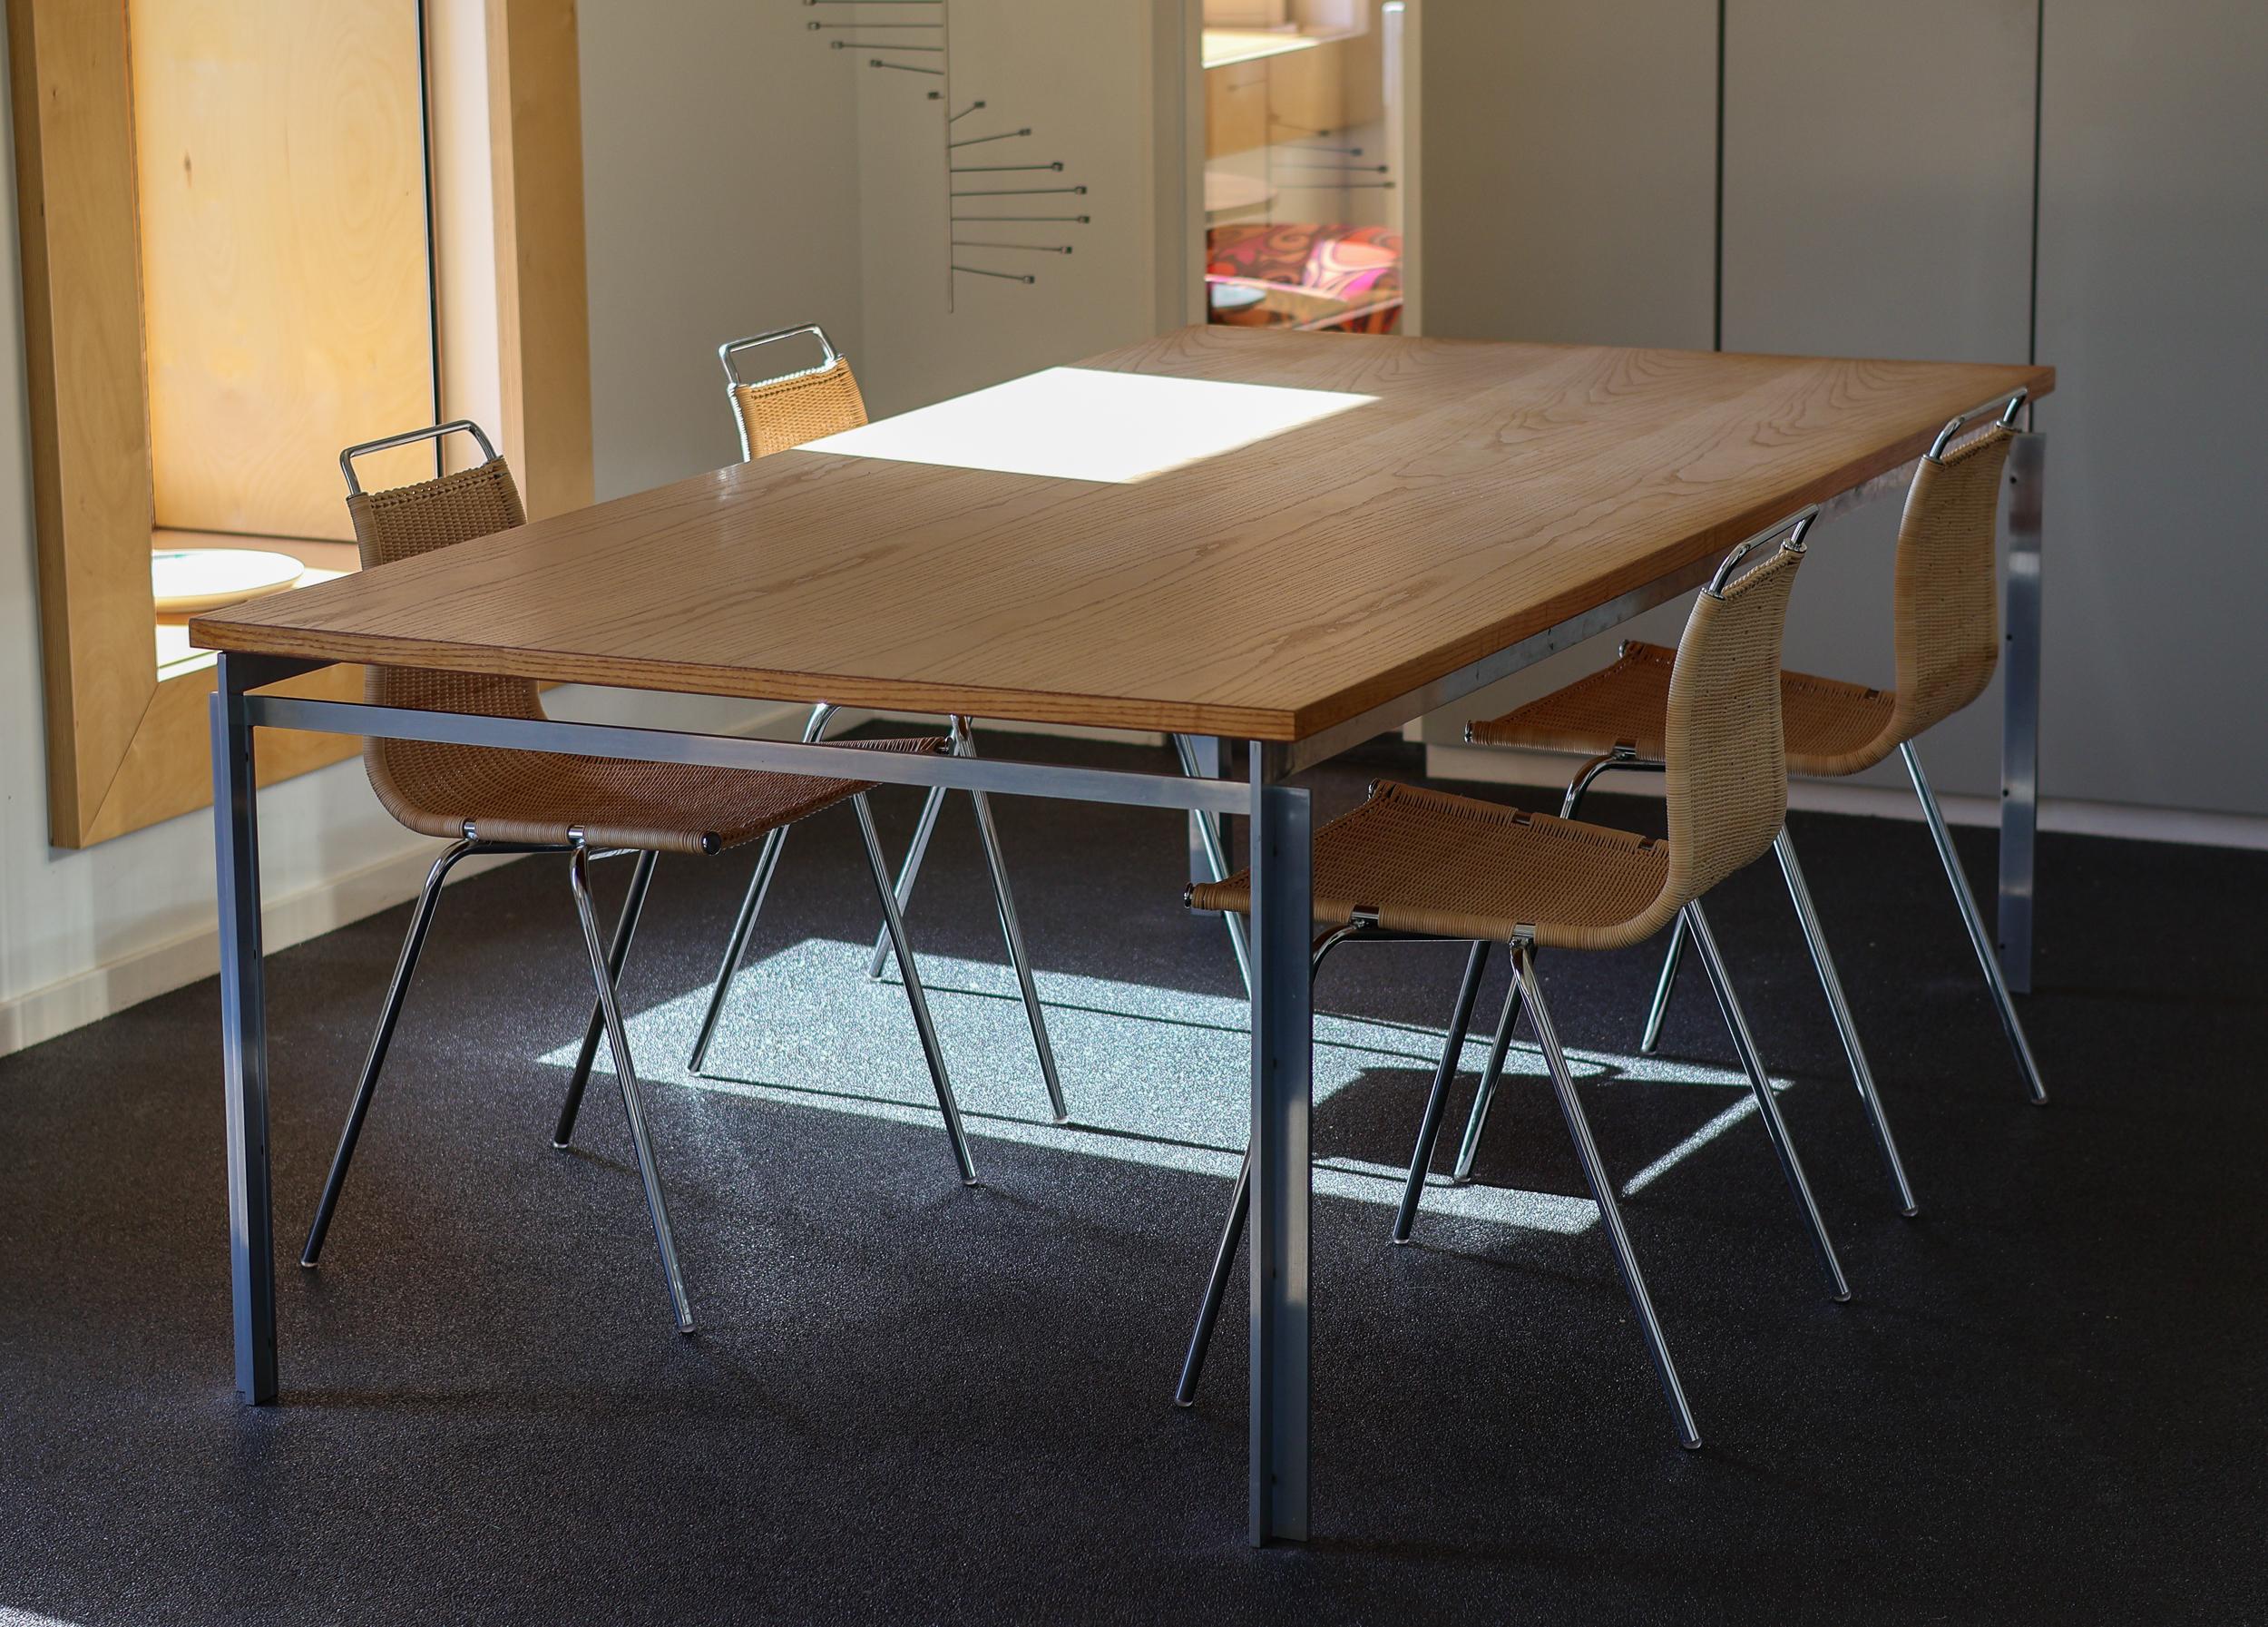 Exceptionally well preserved example of iconic work / dining table model PK55 designed by Danish architect Poul Kjaerholm in 1957, manufactured by Ejvindt Kold Christensen according the stamped logo at the inside of the frame (photographed). 